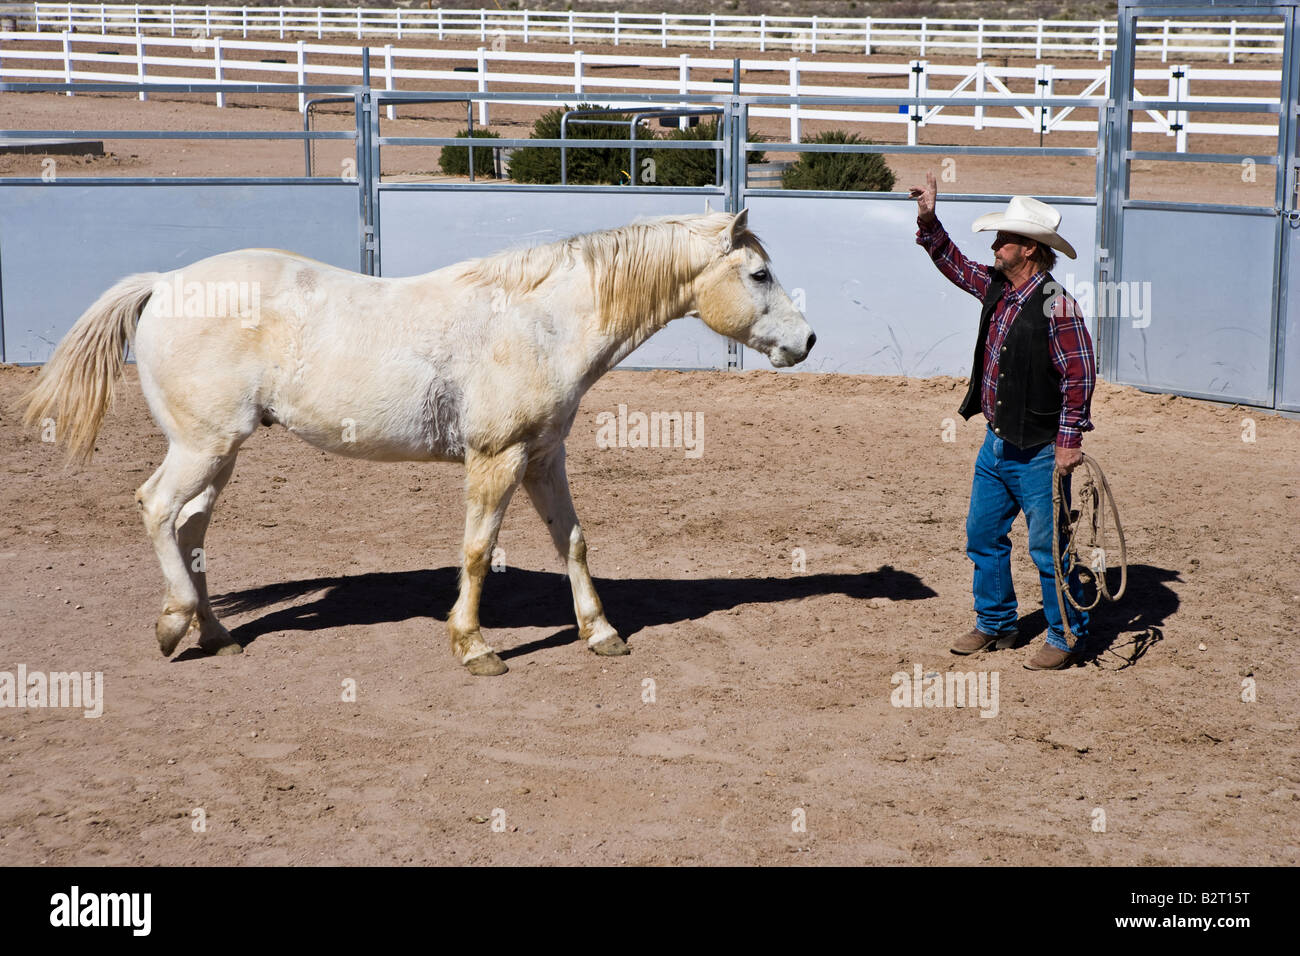 Horsemanship - horse being trained by cowboy trainer New Mexico USA Stock Photo